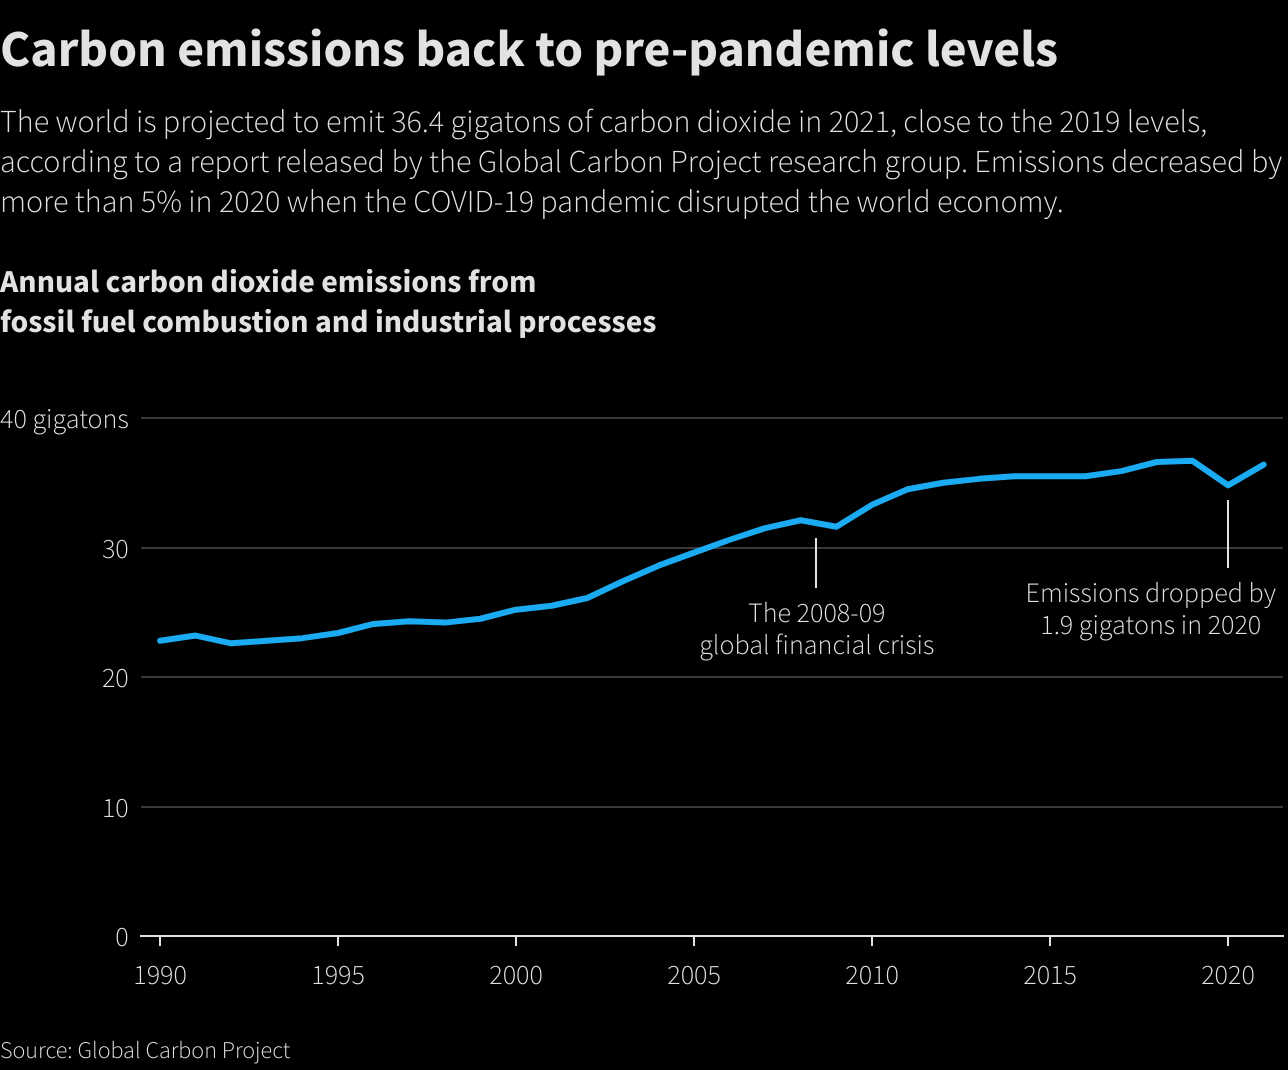 Carbon emissions back to pre-pandemic levels